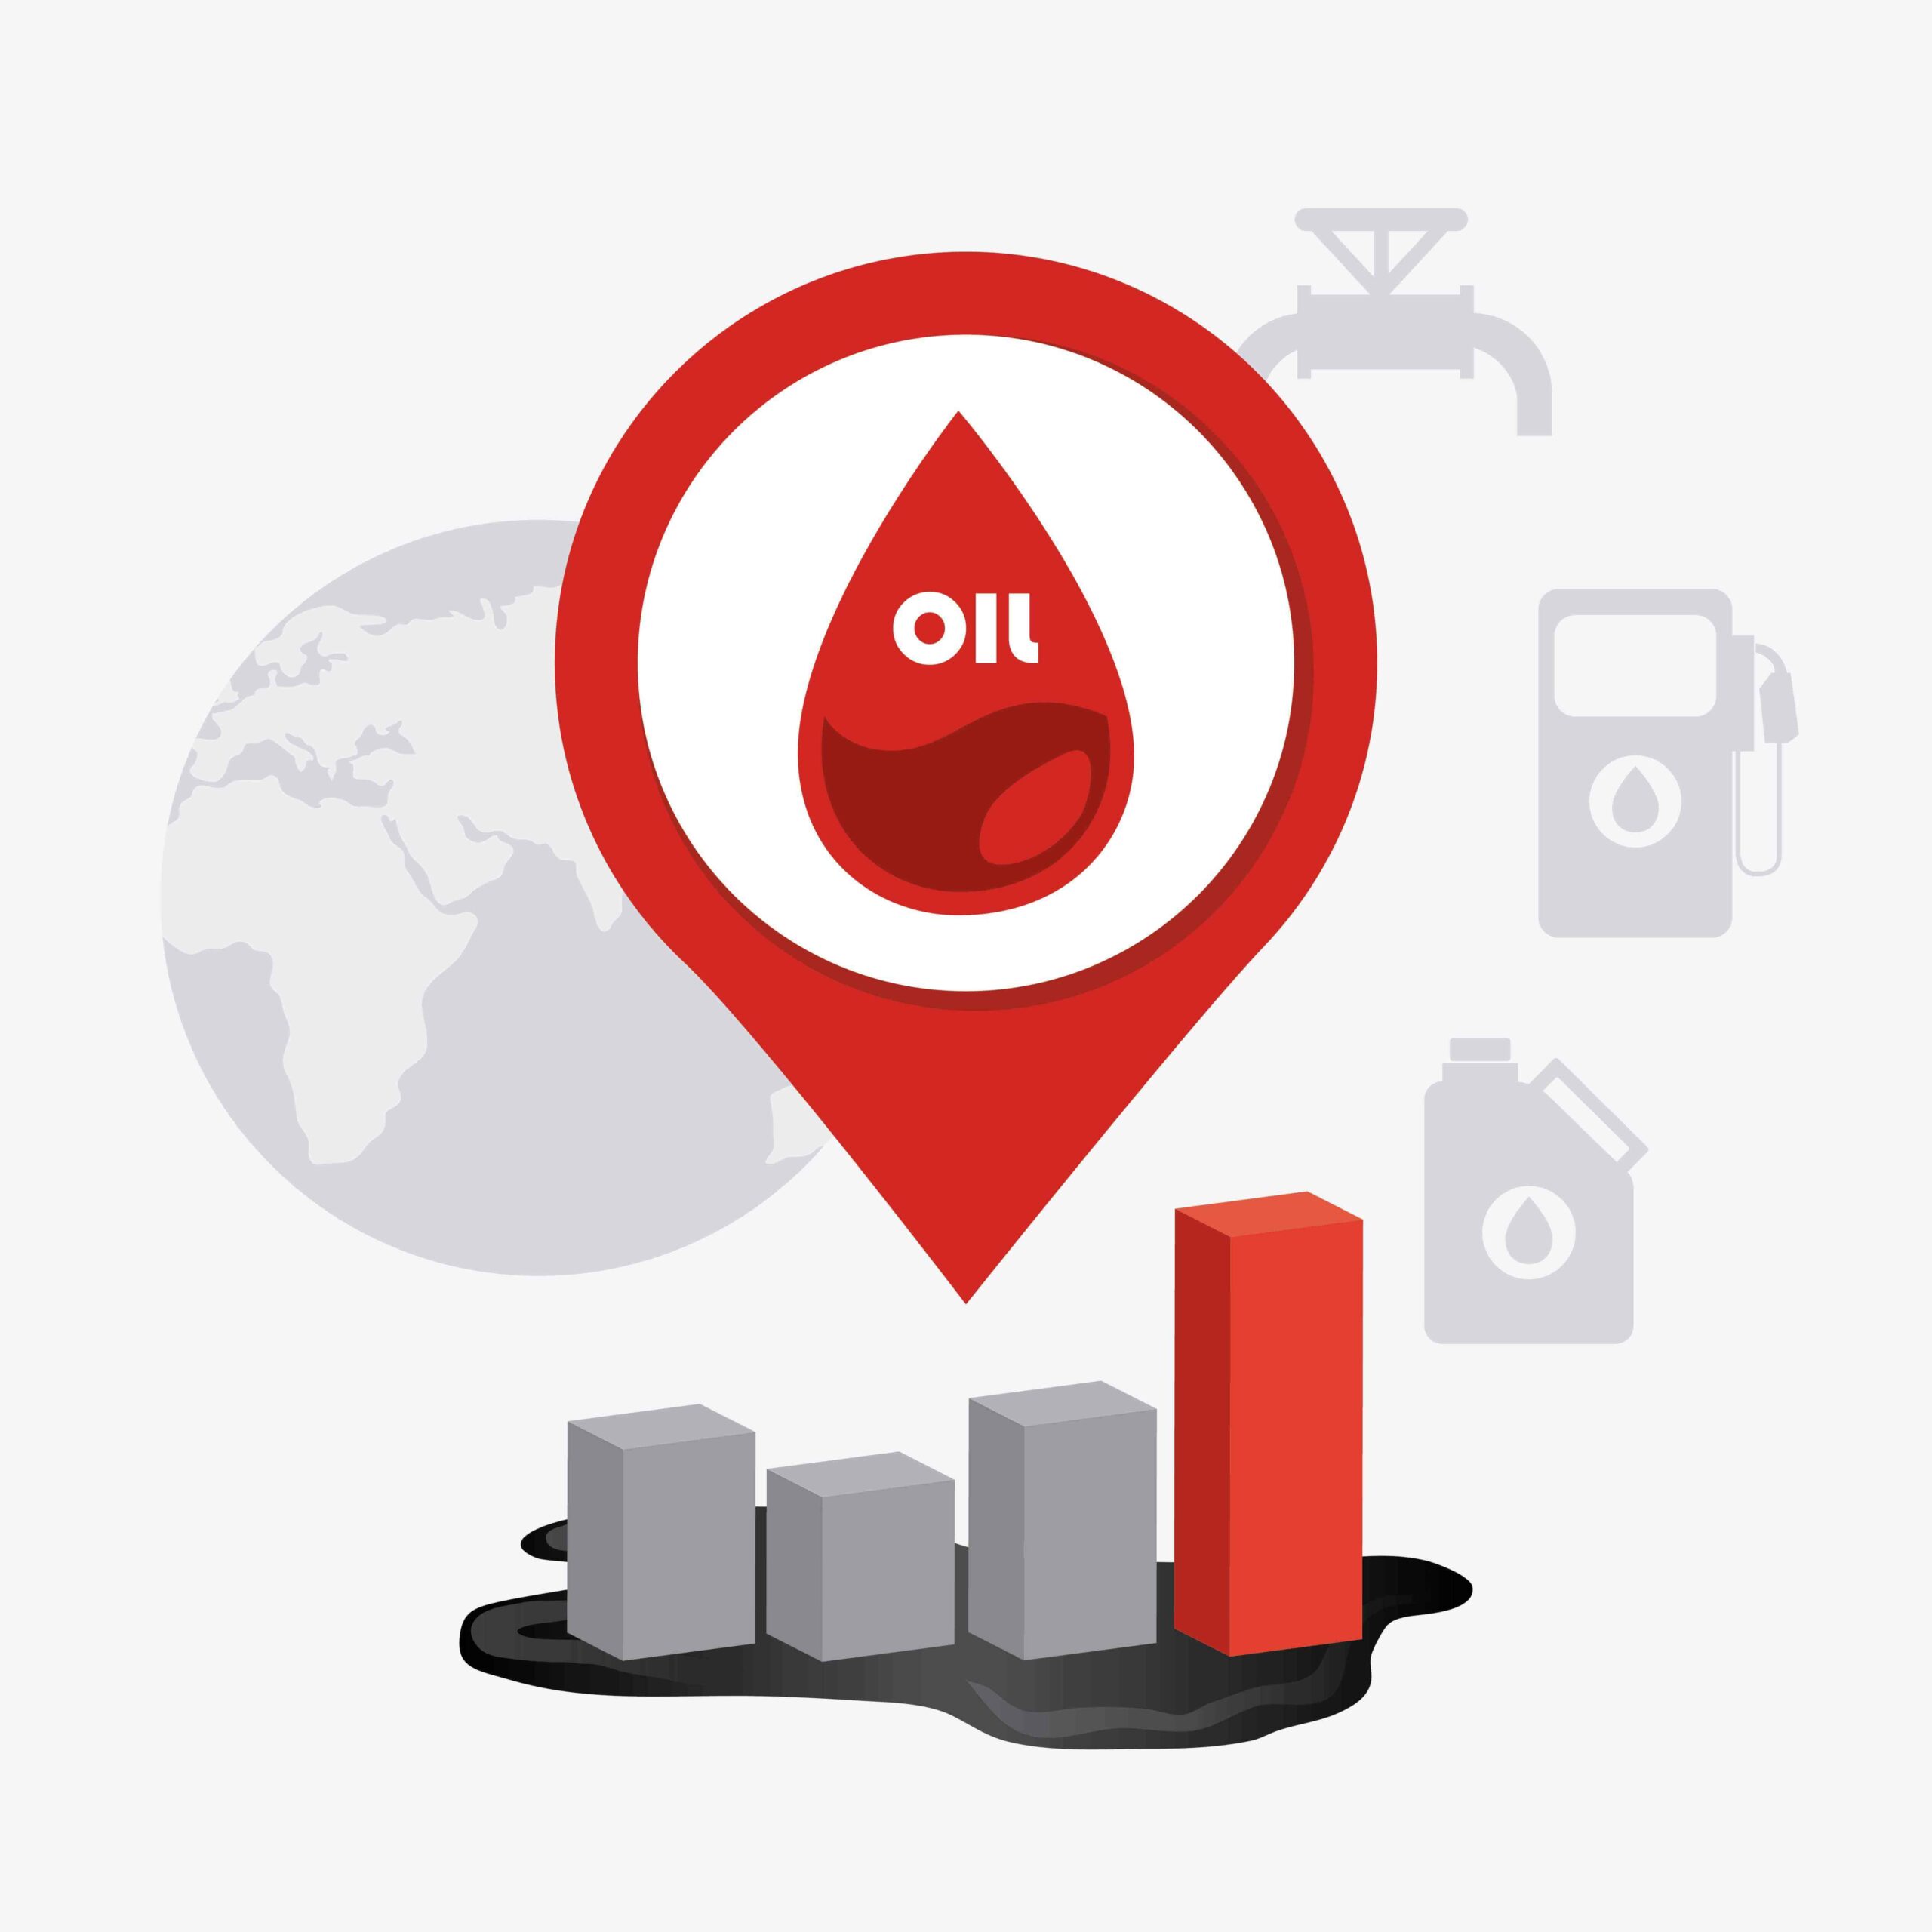 Oil Tank Regulations UK - All You Need to Know